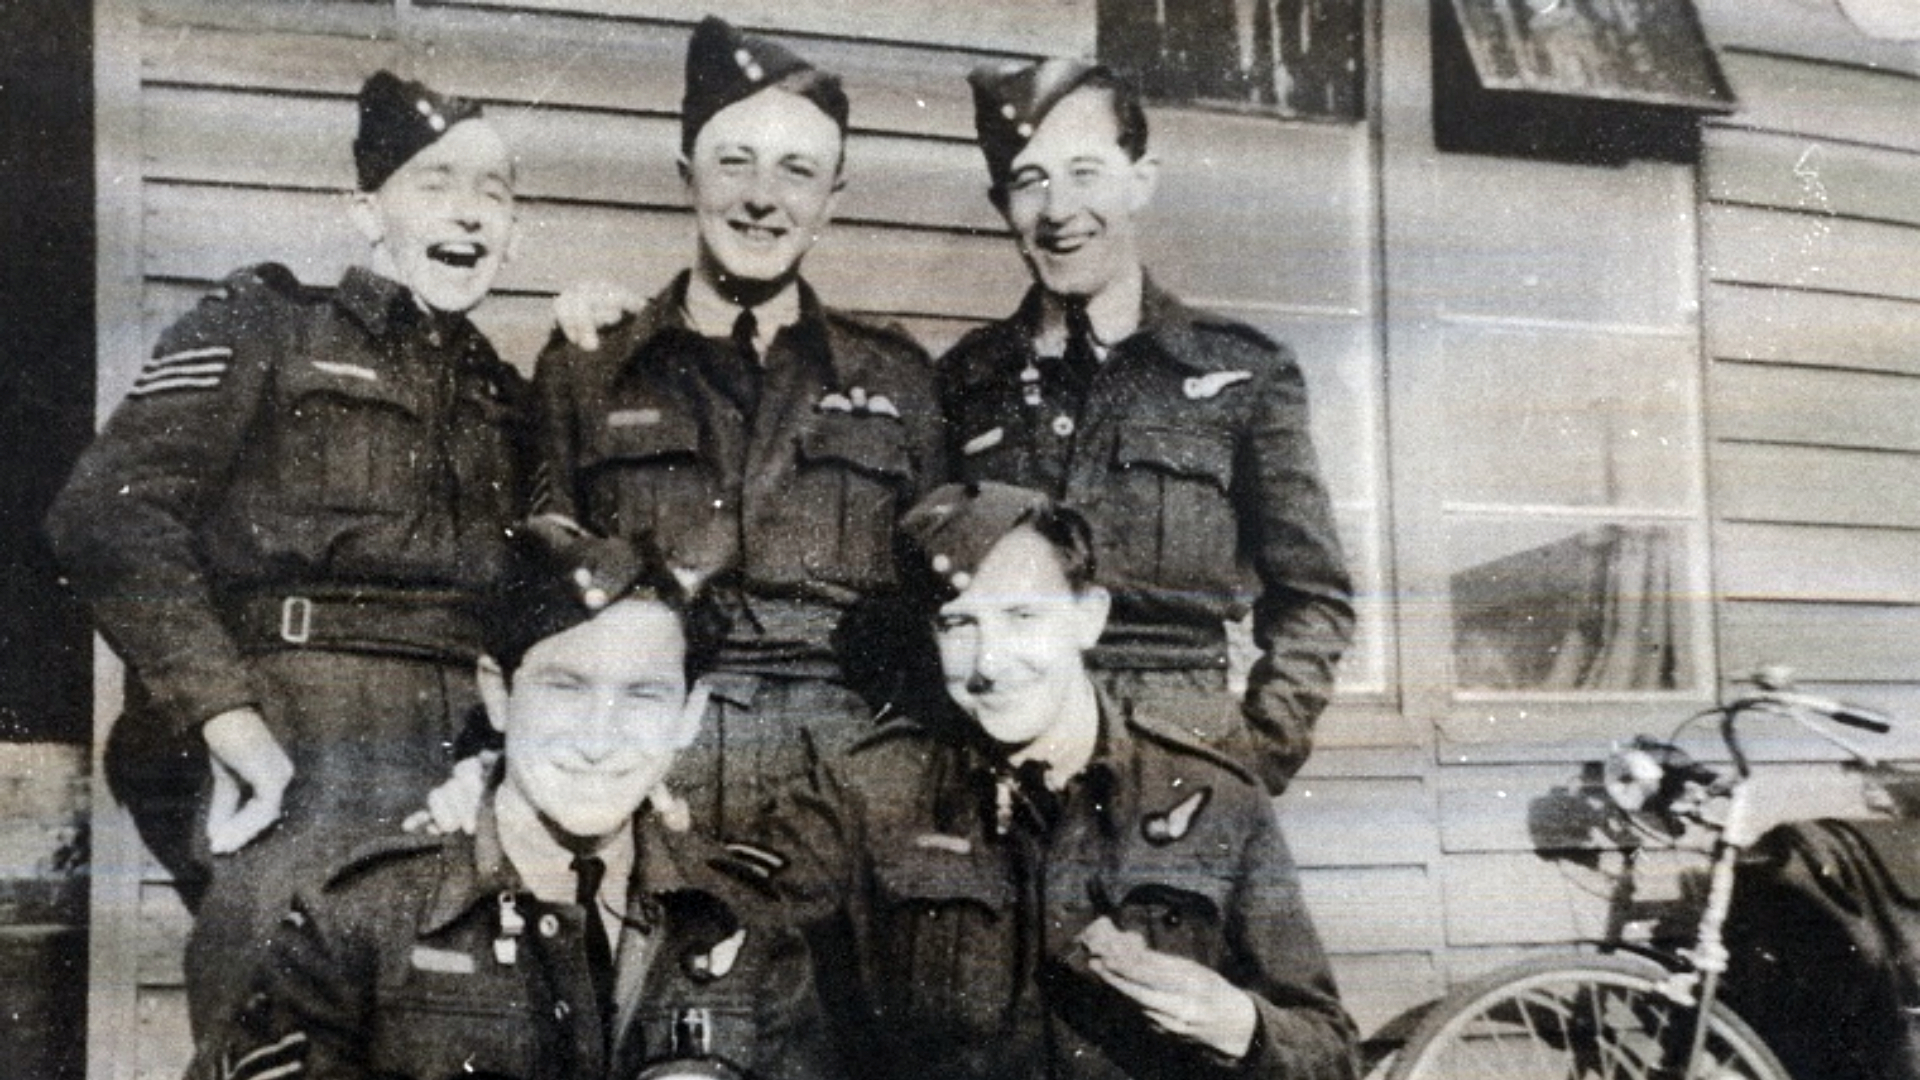 Members of the crew of Avro Lancaster ED684 AJ-B of R.A.F. 617 Squadron including Sergeant Richard 'Dickie' Bolitho during their time with R.A.F. 9 Squadron in Scotland.